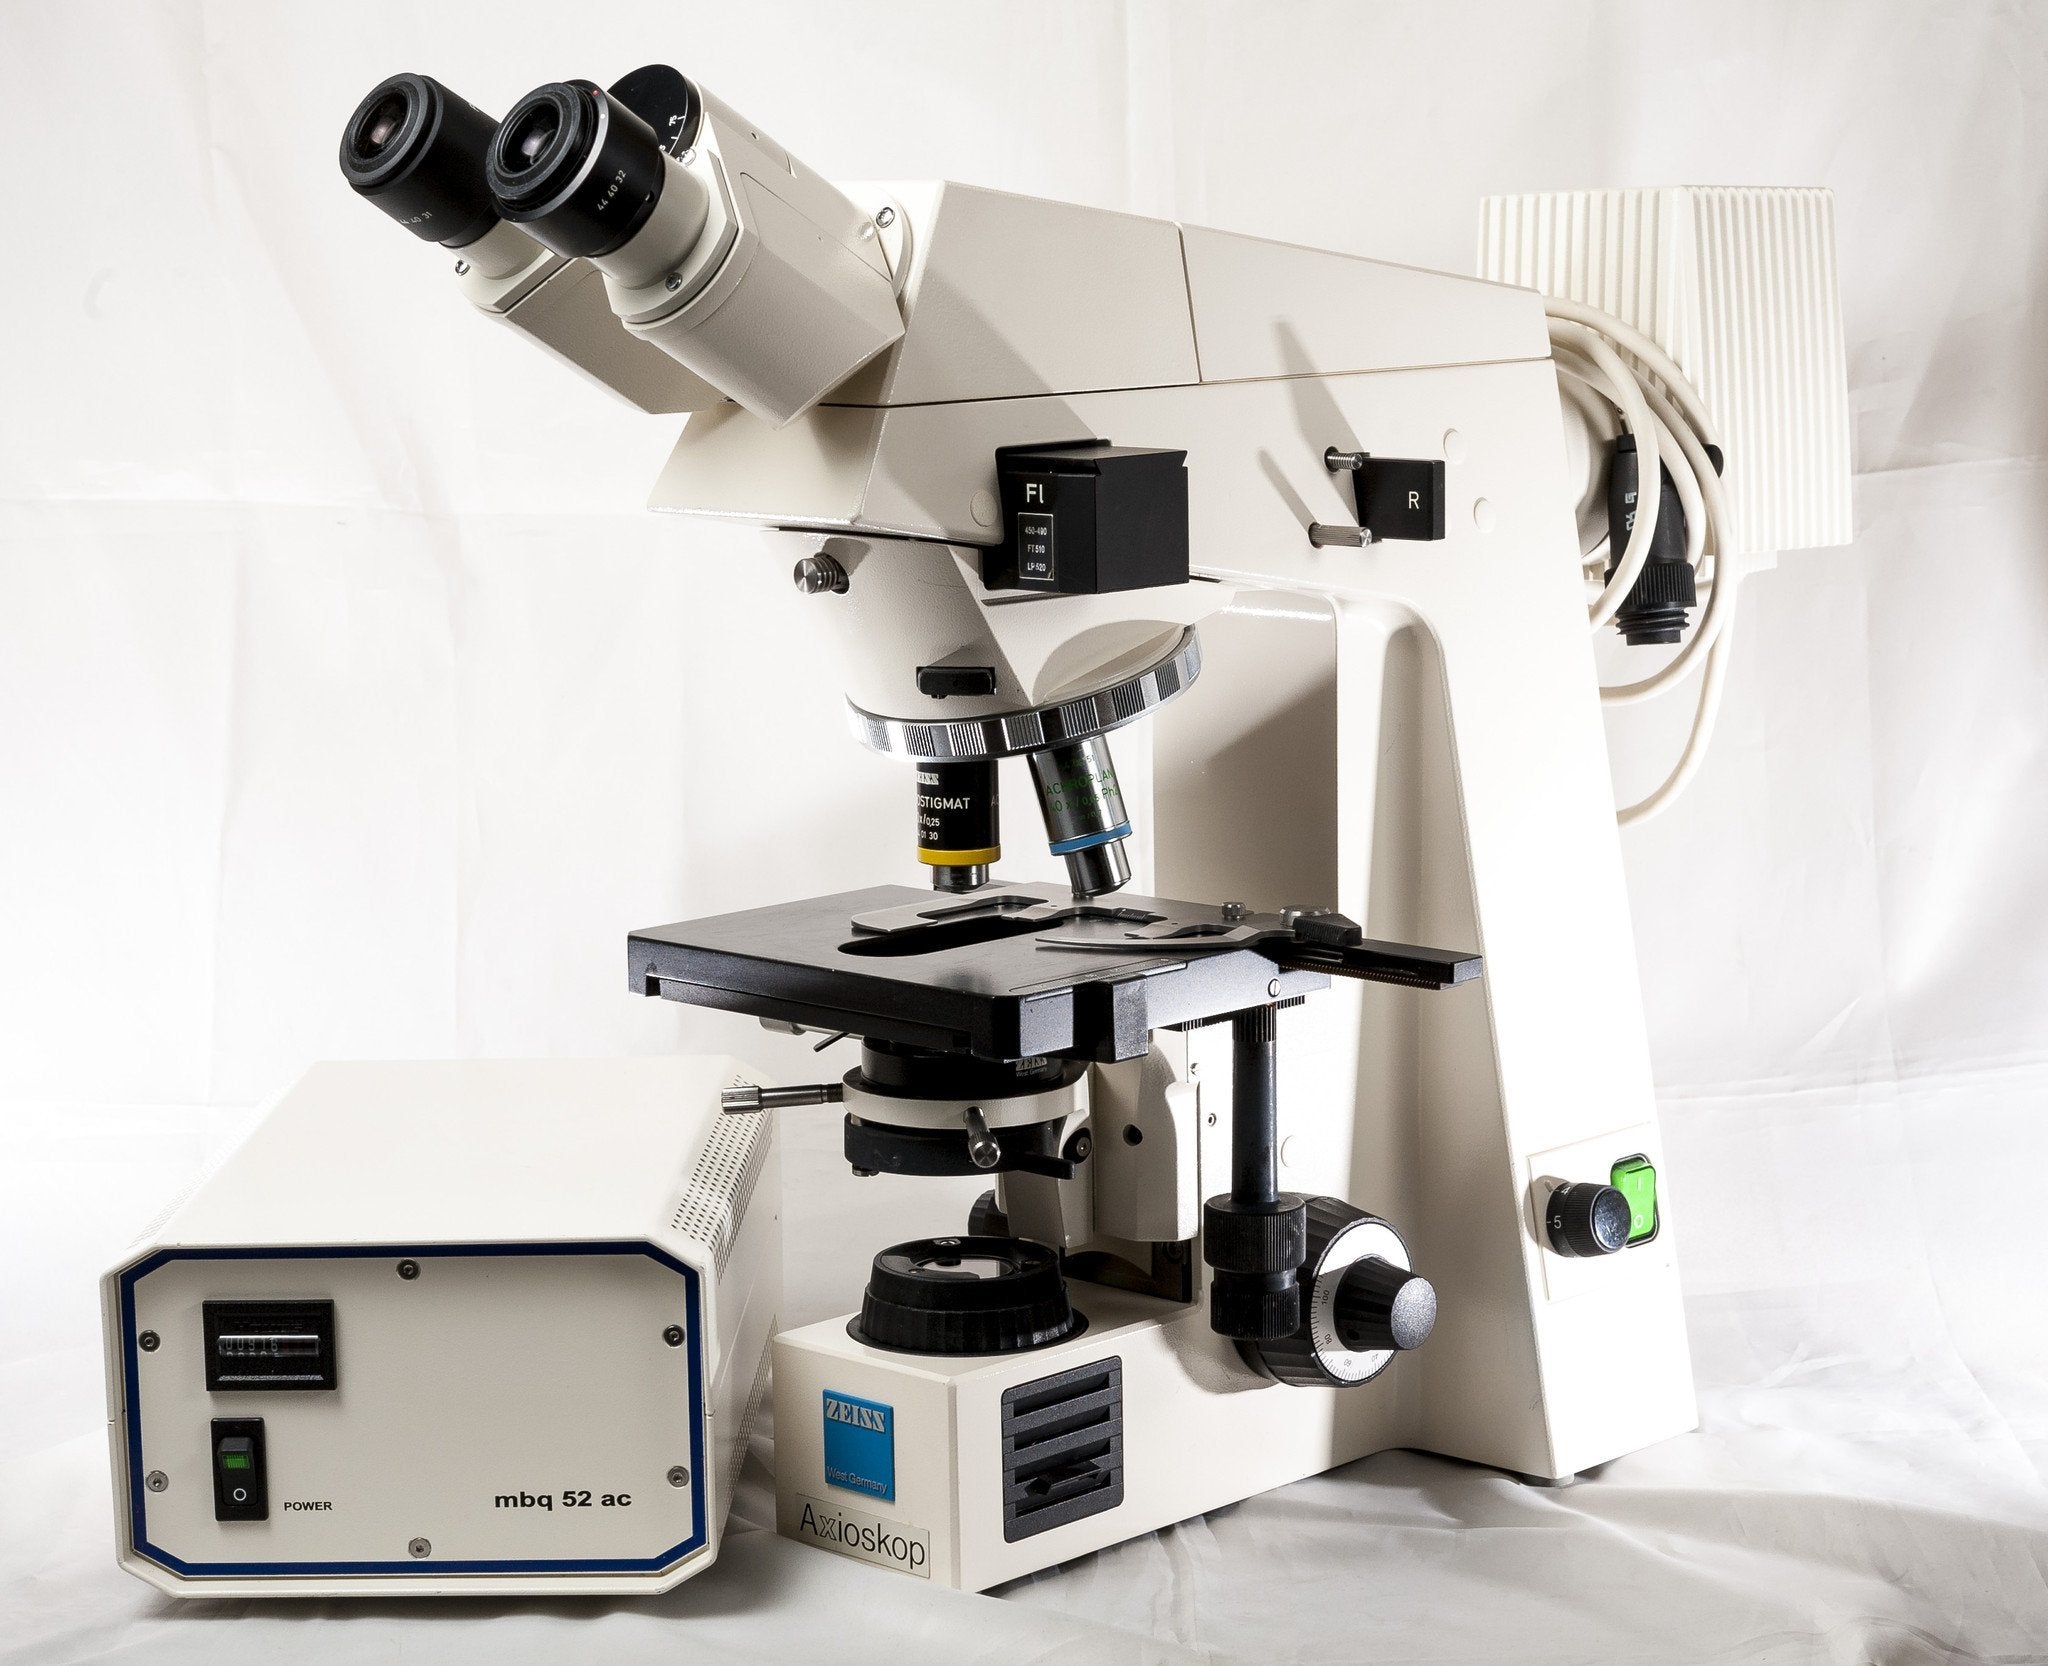 Zeiss Axioskop Fluorescence Phase Contrast Microscope